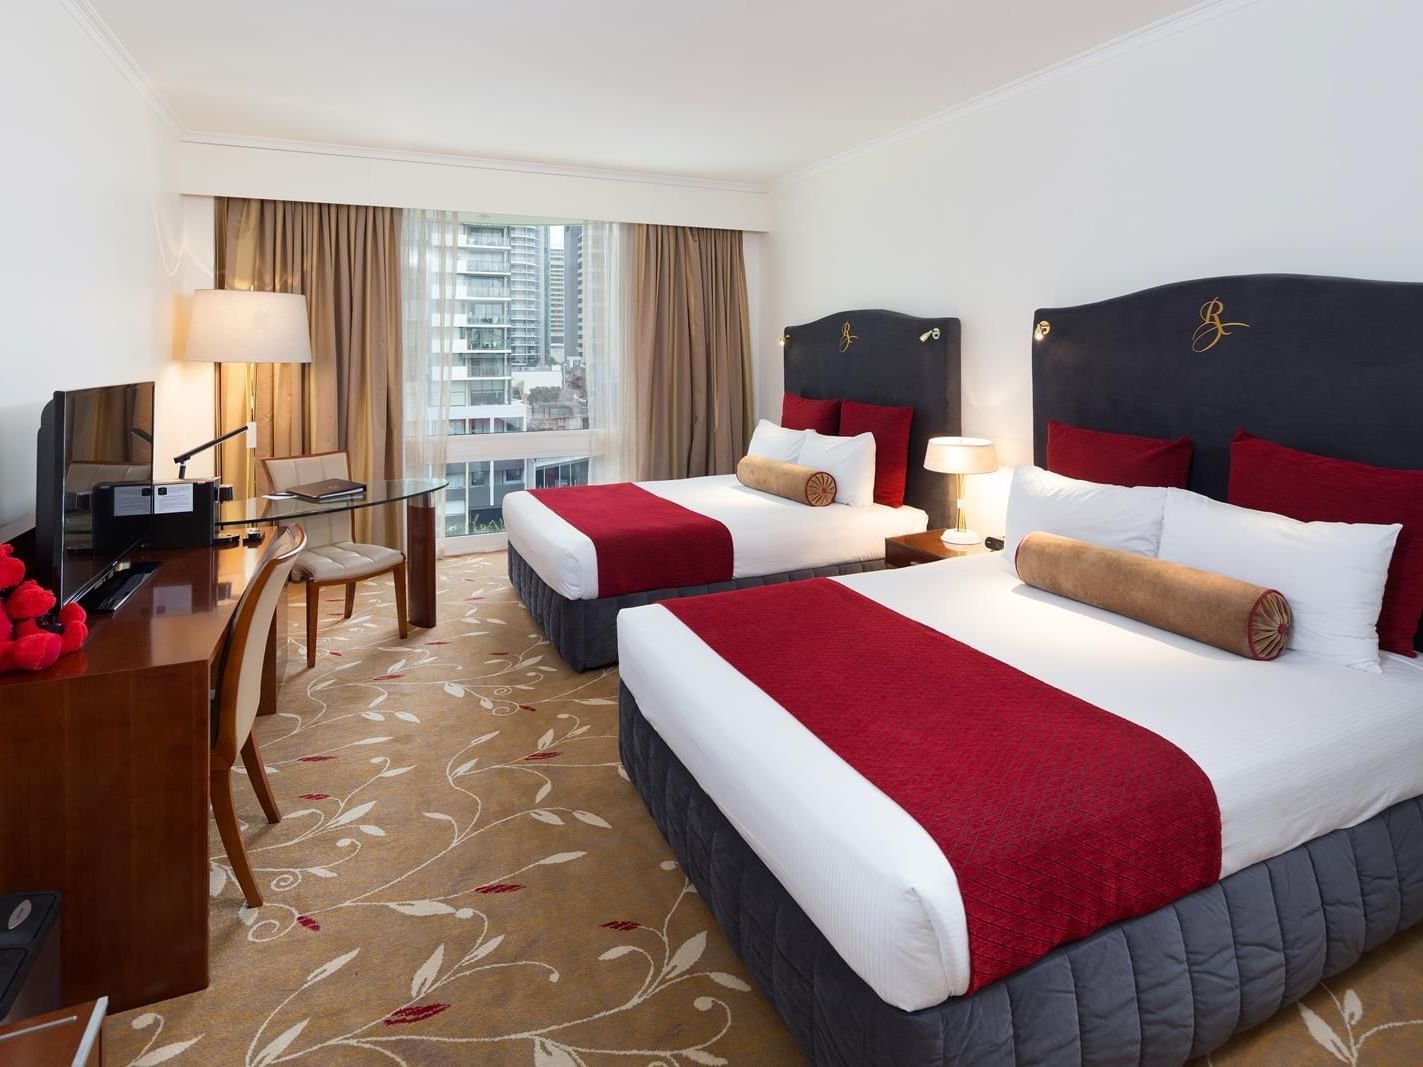 Deluxe City View Twin Room with two double beds at Royal on the Park hotel